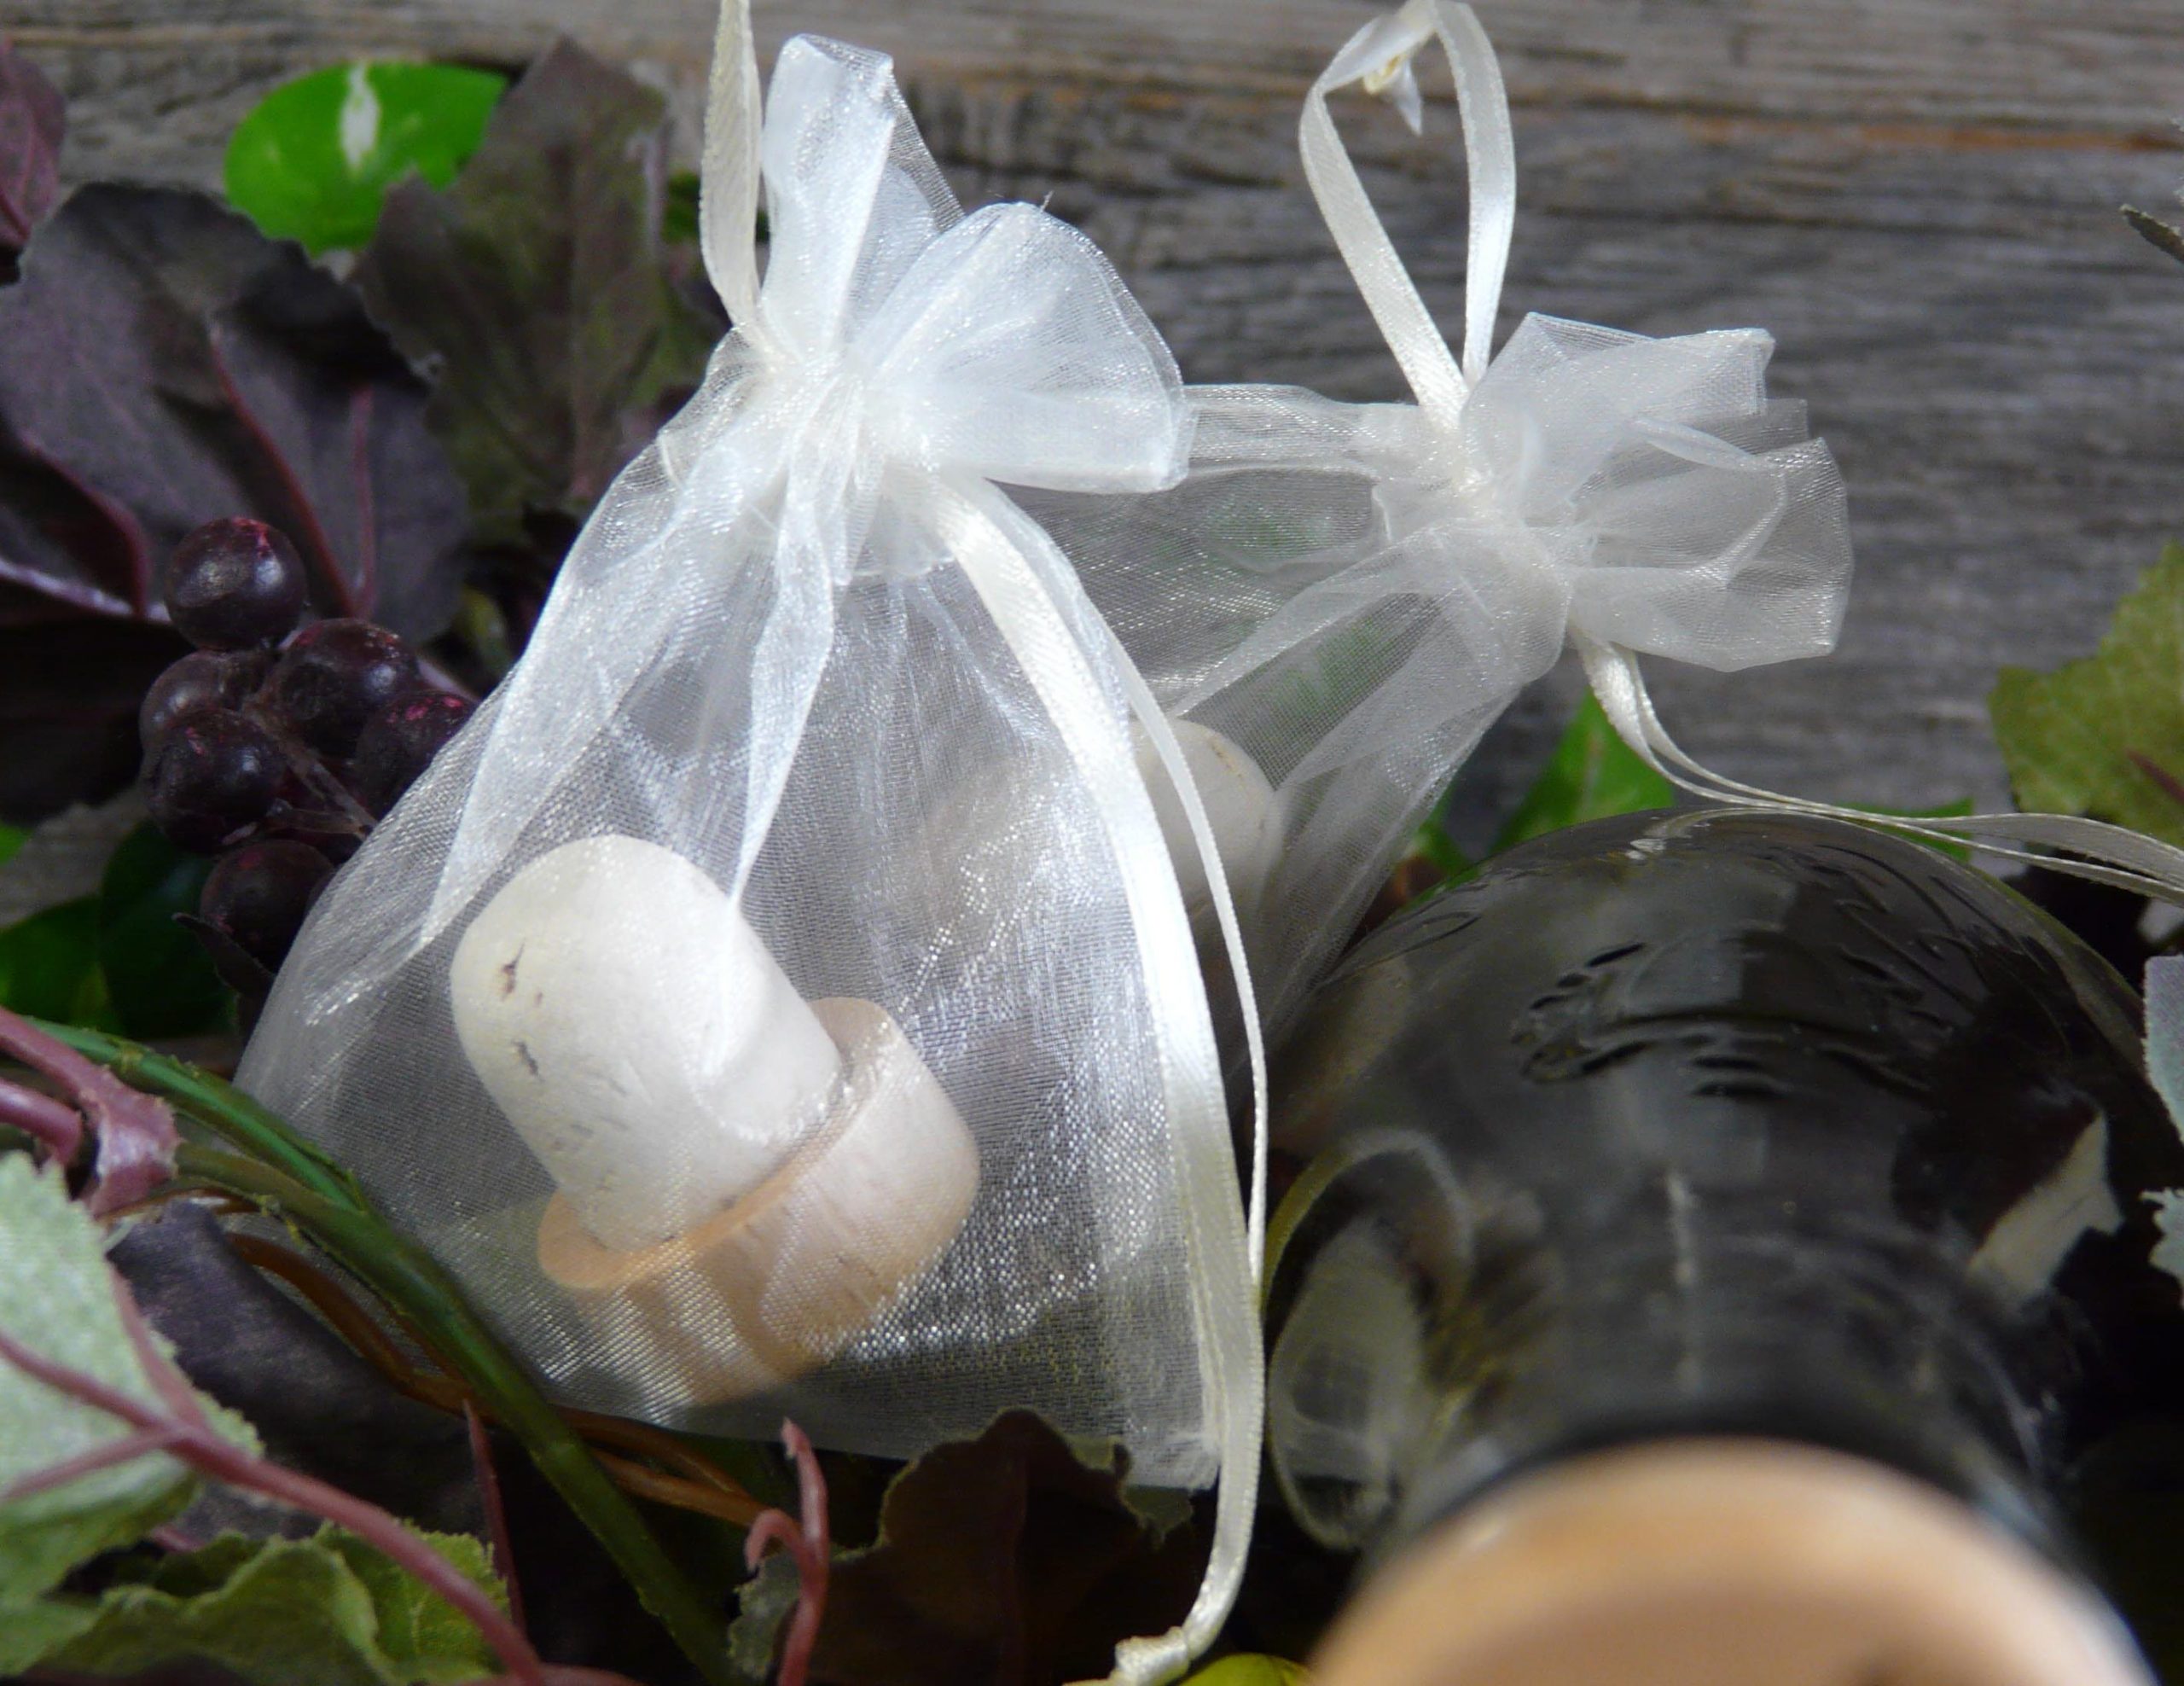 Order our organza bags with your personalized wine stoppers and they will come pre-packaged.